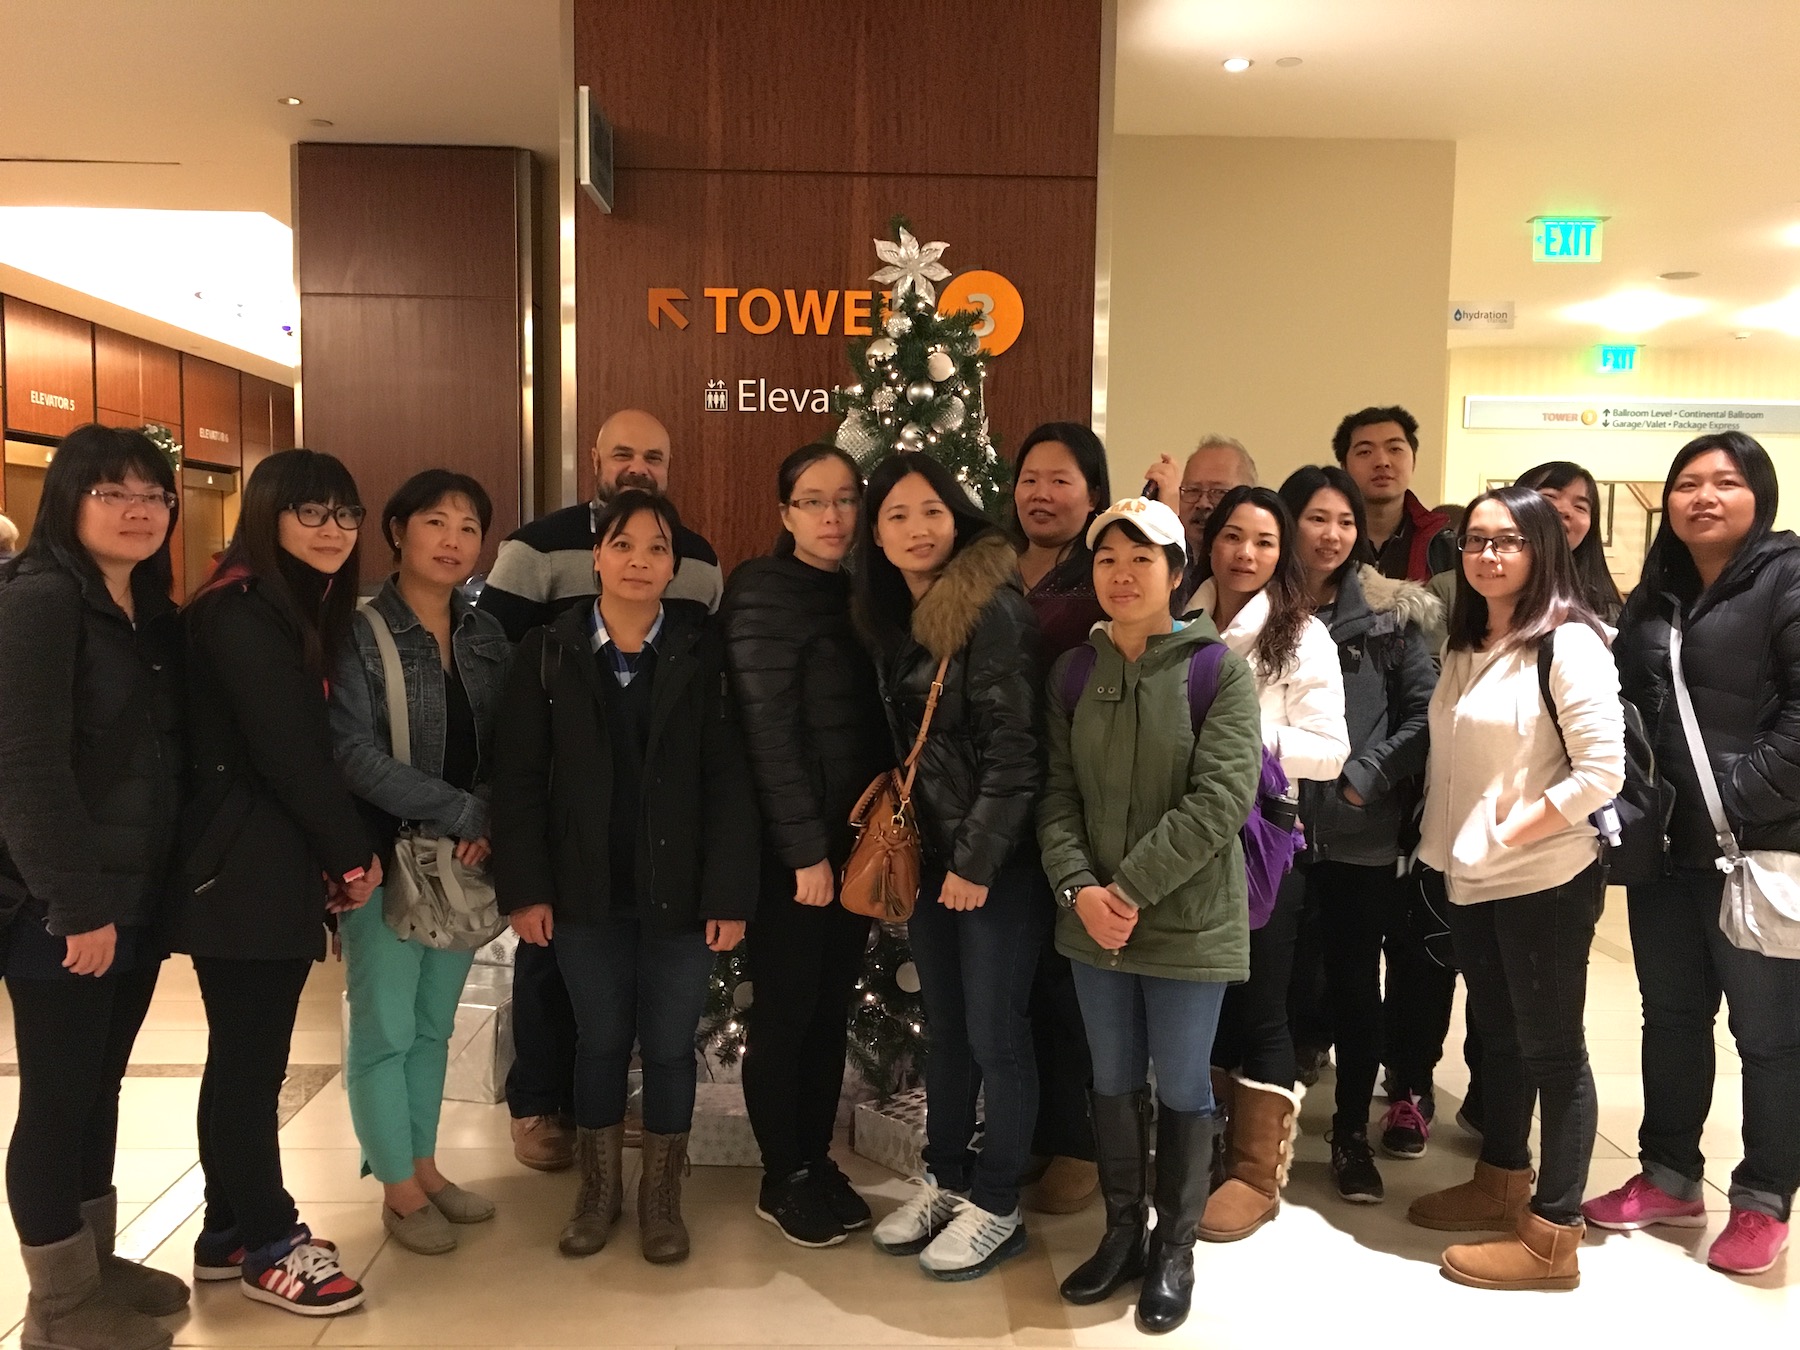 A group of 16 people, mostly Asian, pose together for a photo in the lobby of a hotel